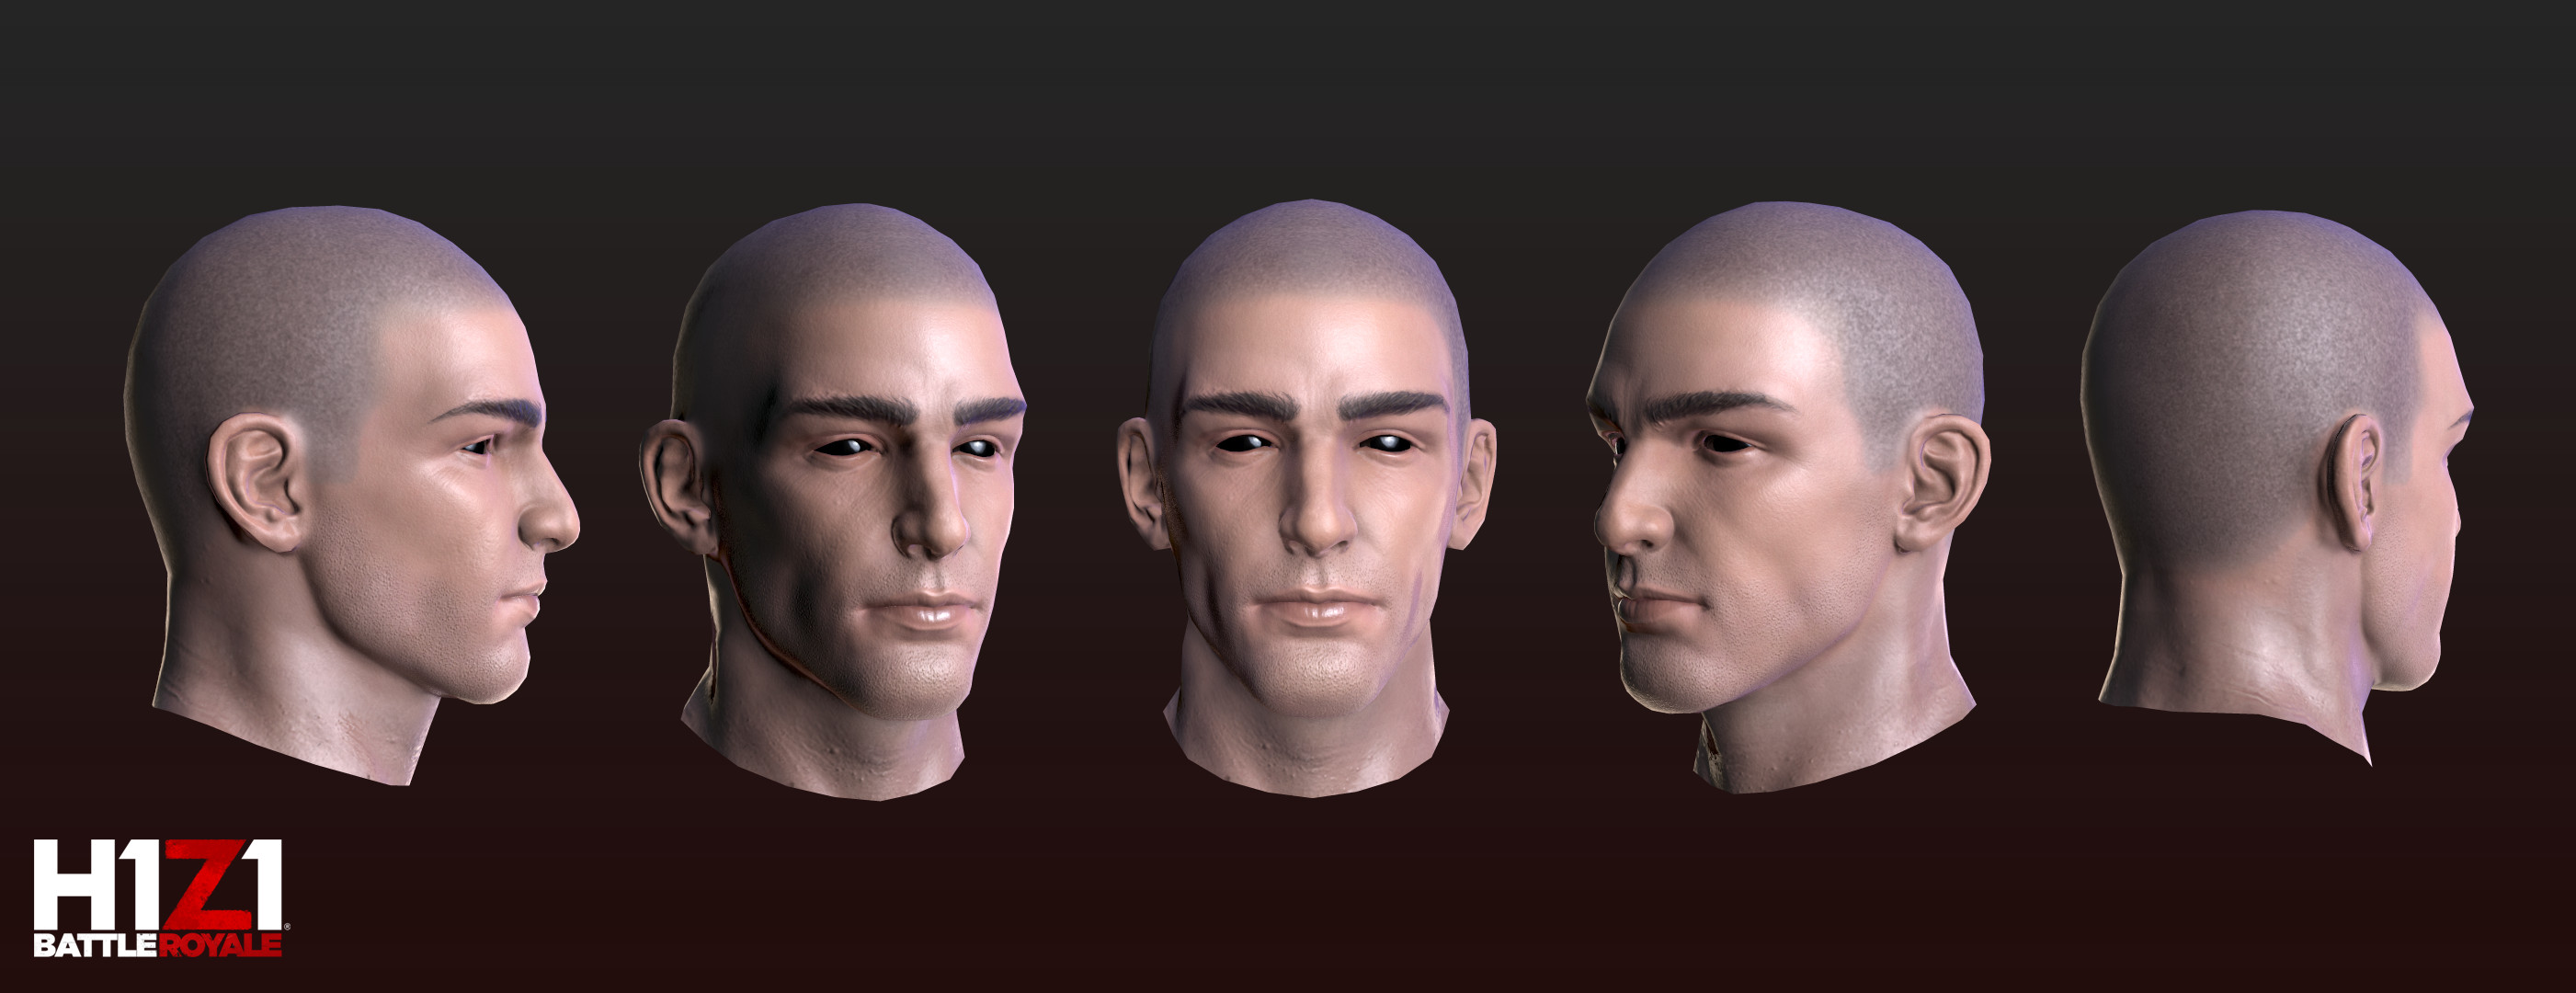 I textured one of the selectable  player character heads for the PS4 version of H1Z1.